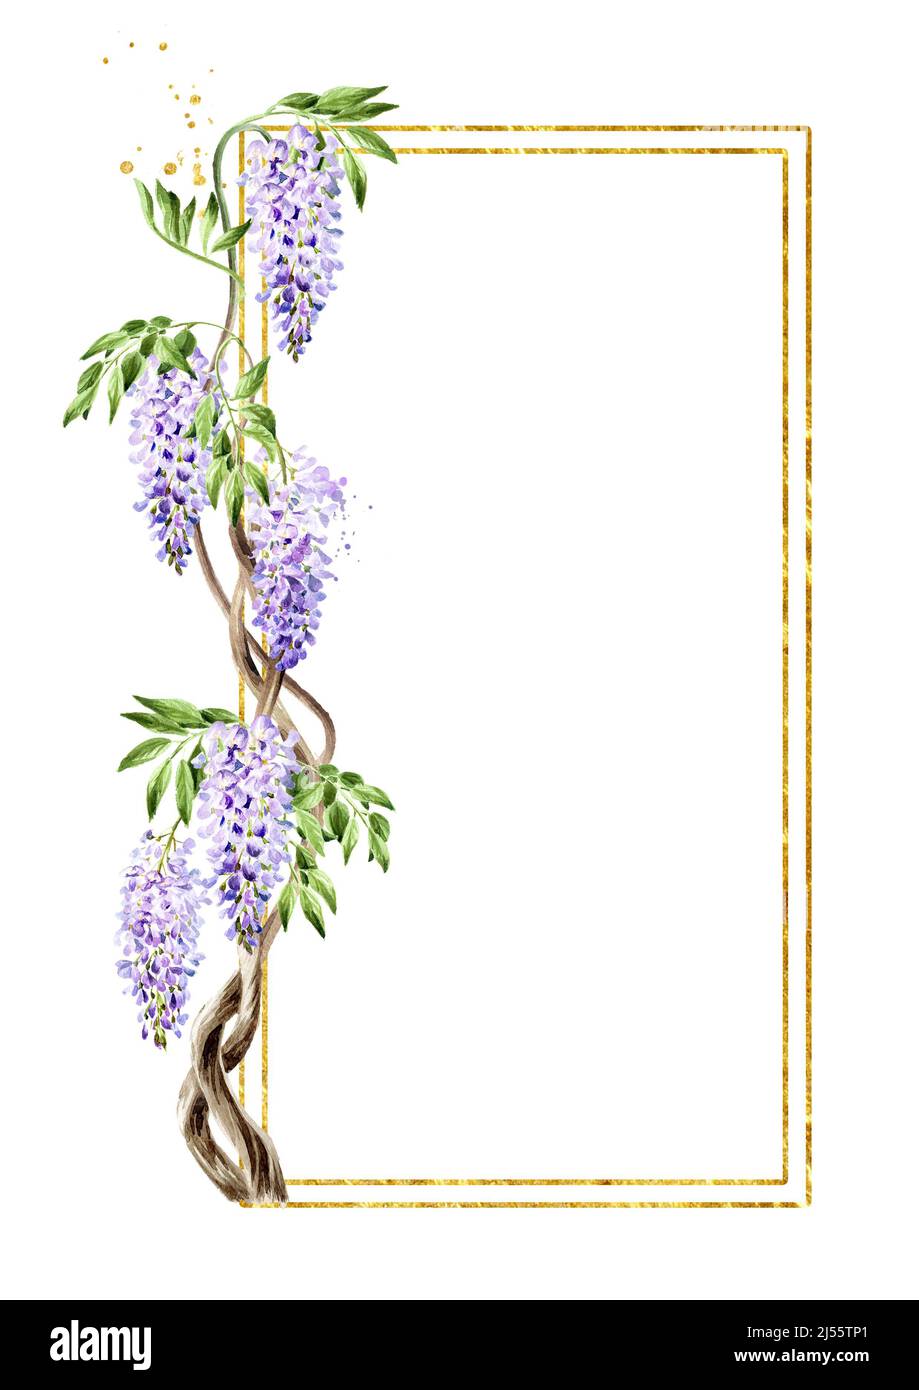 Wisteria flower card,  Hand drawn watercolor  illustration, isolated on white background Stock Photo